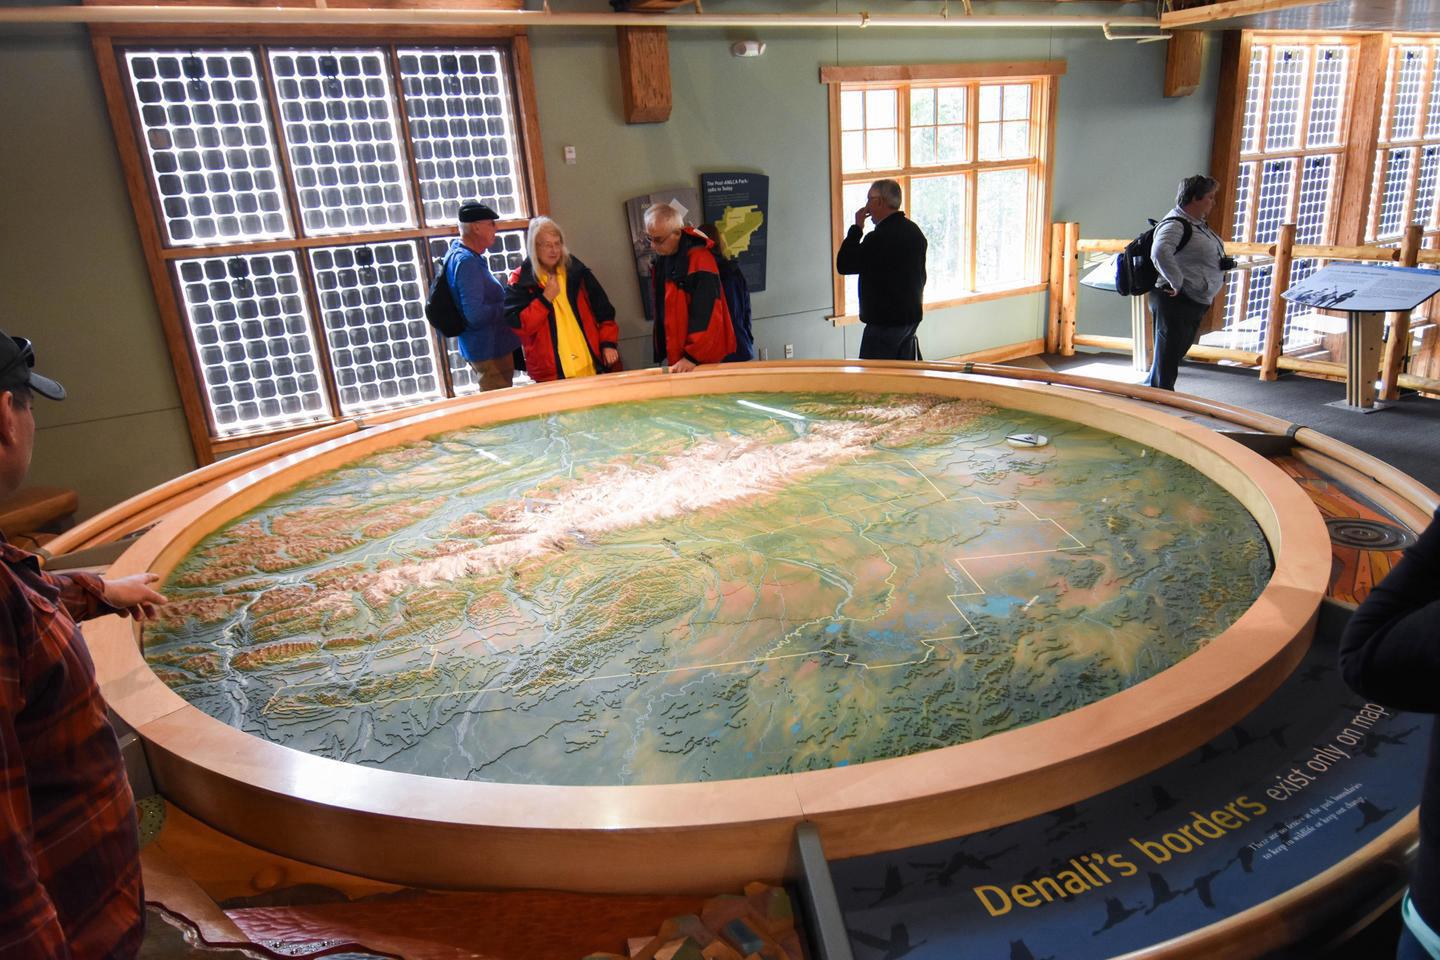 Denali Relief MapOne of the features of the Denali Visitor Center is a relief map that illustrates the Alaska Range and its highest peak, Denali